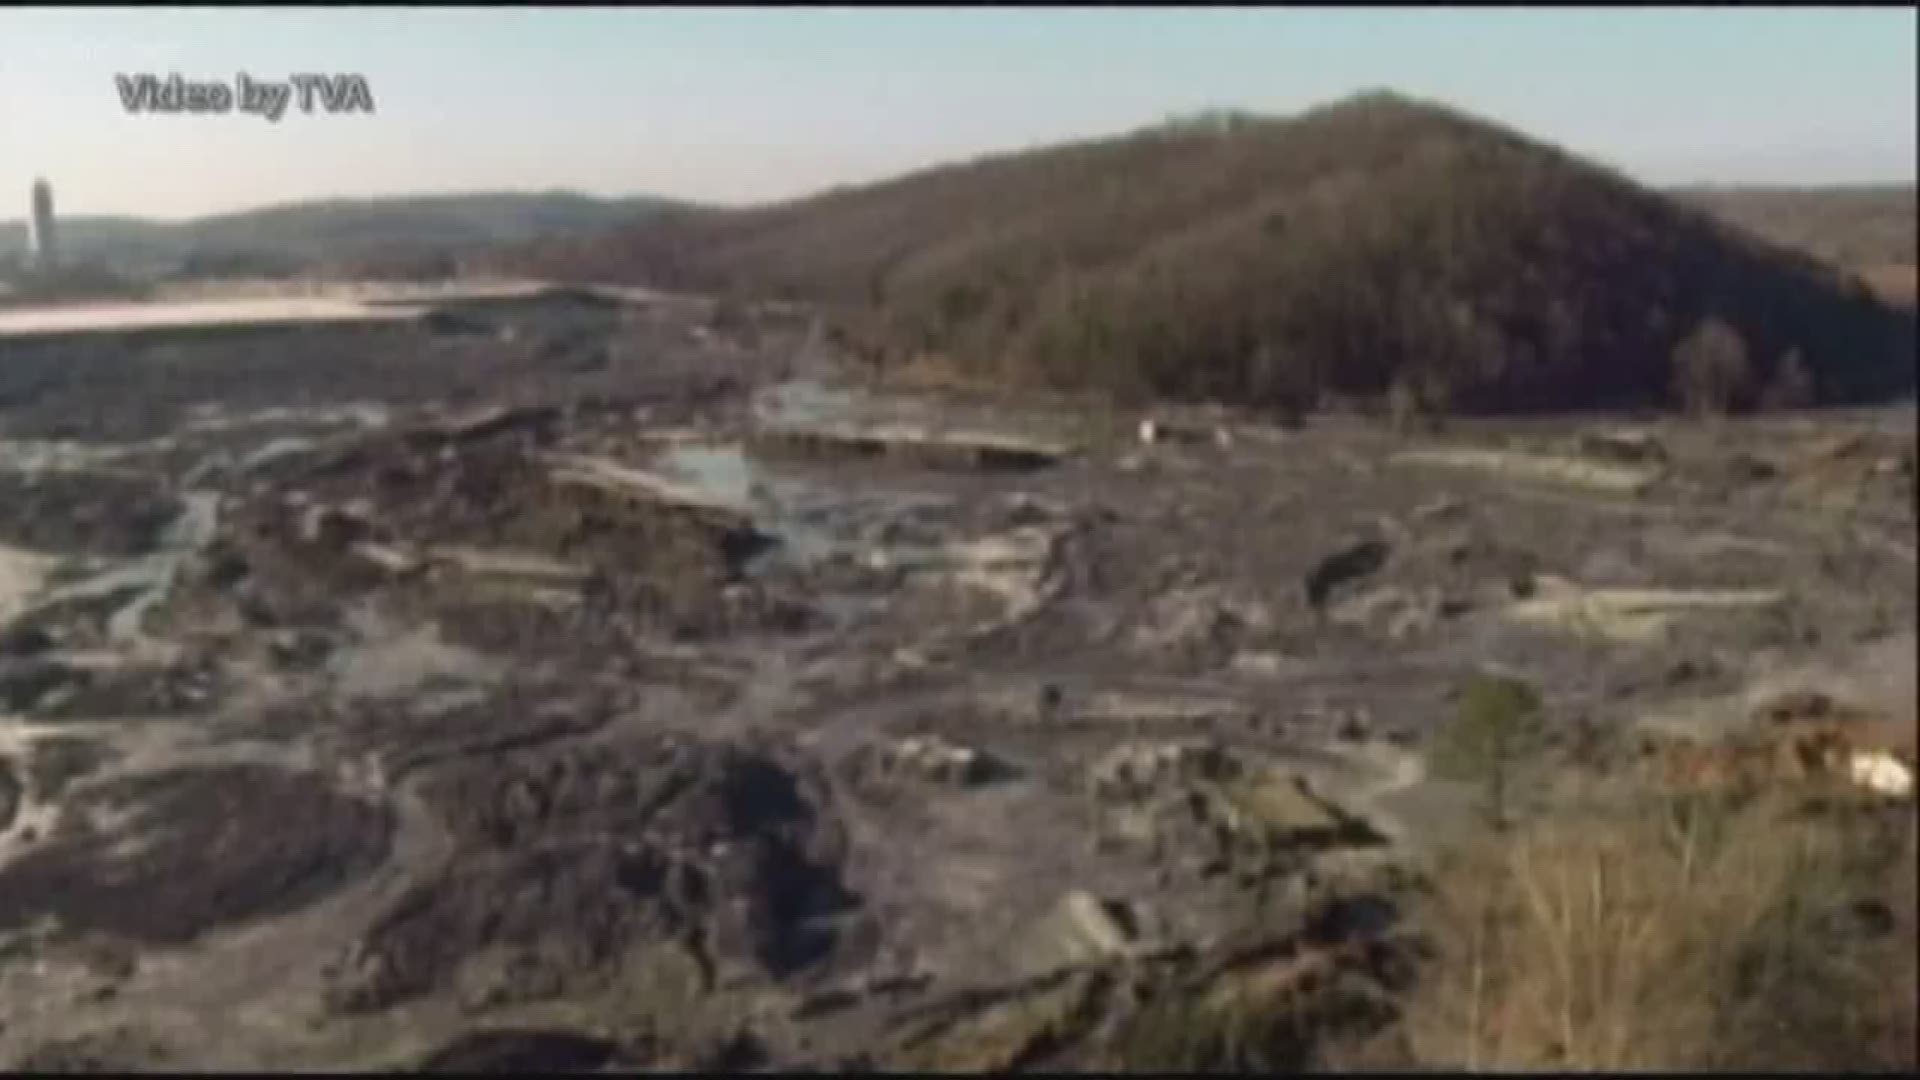 A new lawsuit in the 2008 coal ash spill claims TVA is continuing to allow the release of toxic substances from coal ash remnants into the environment. Jeff Lyash, on the job about 30 days, said the lawsuit by Roane County and the cities of Harriman and Kingston raises allegations that must be taken seriously.